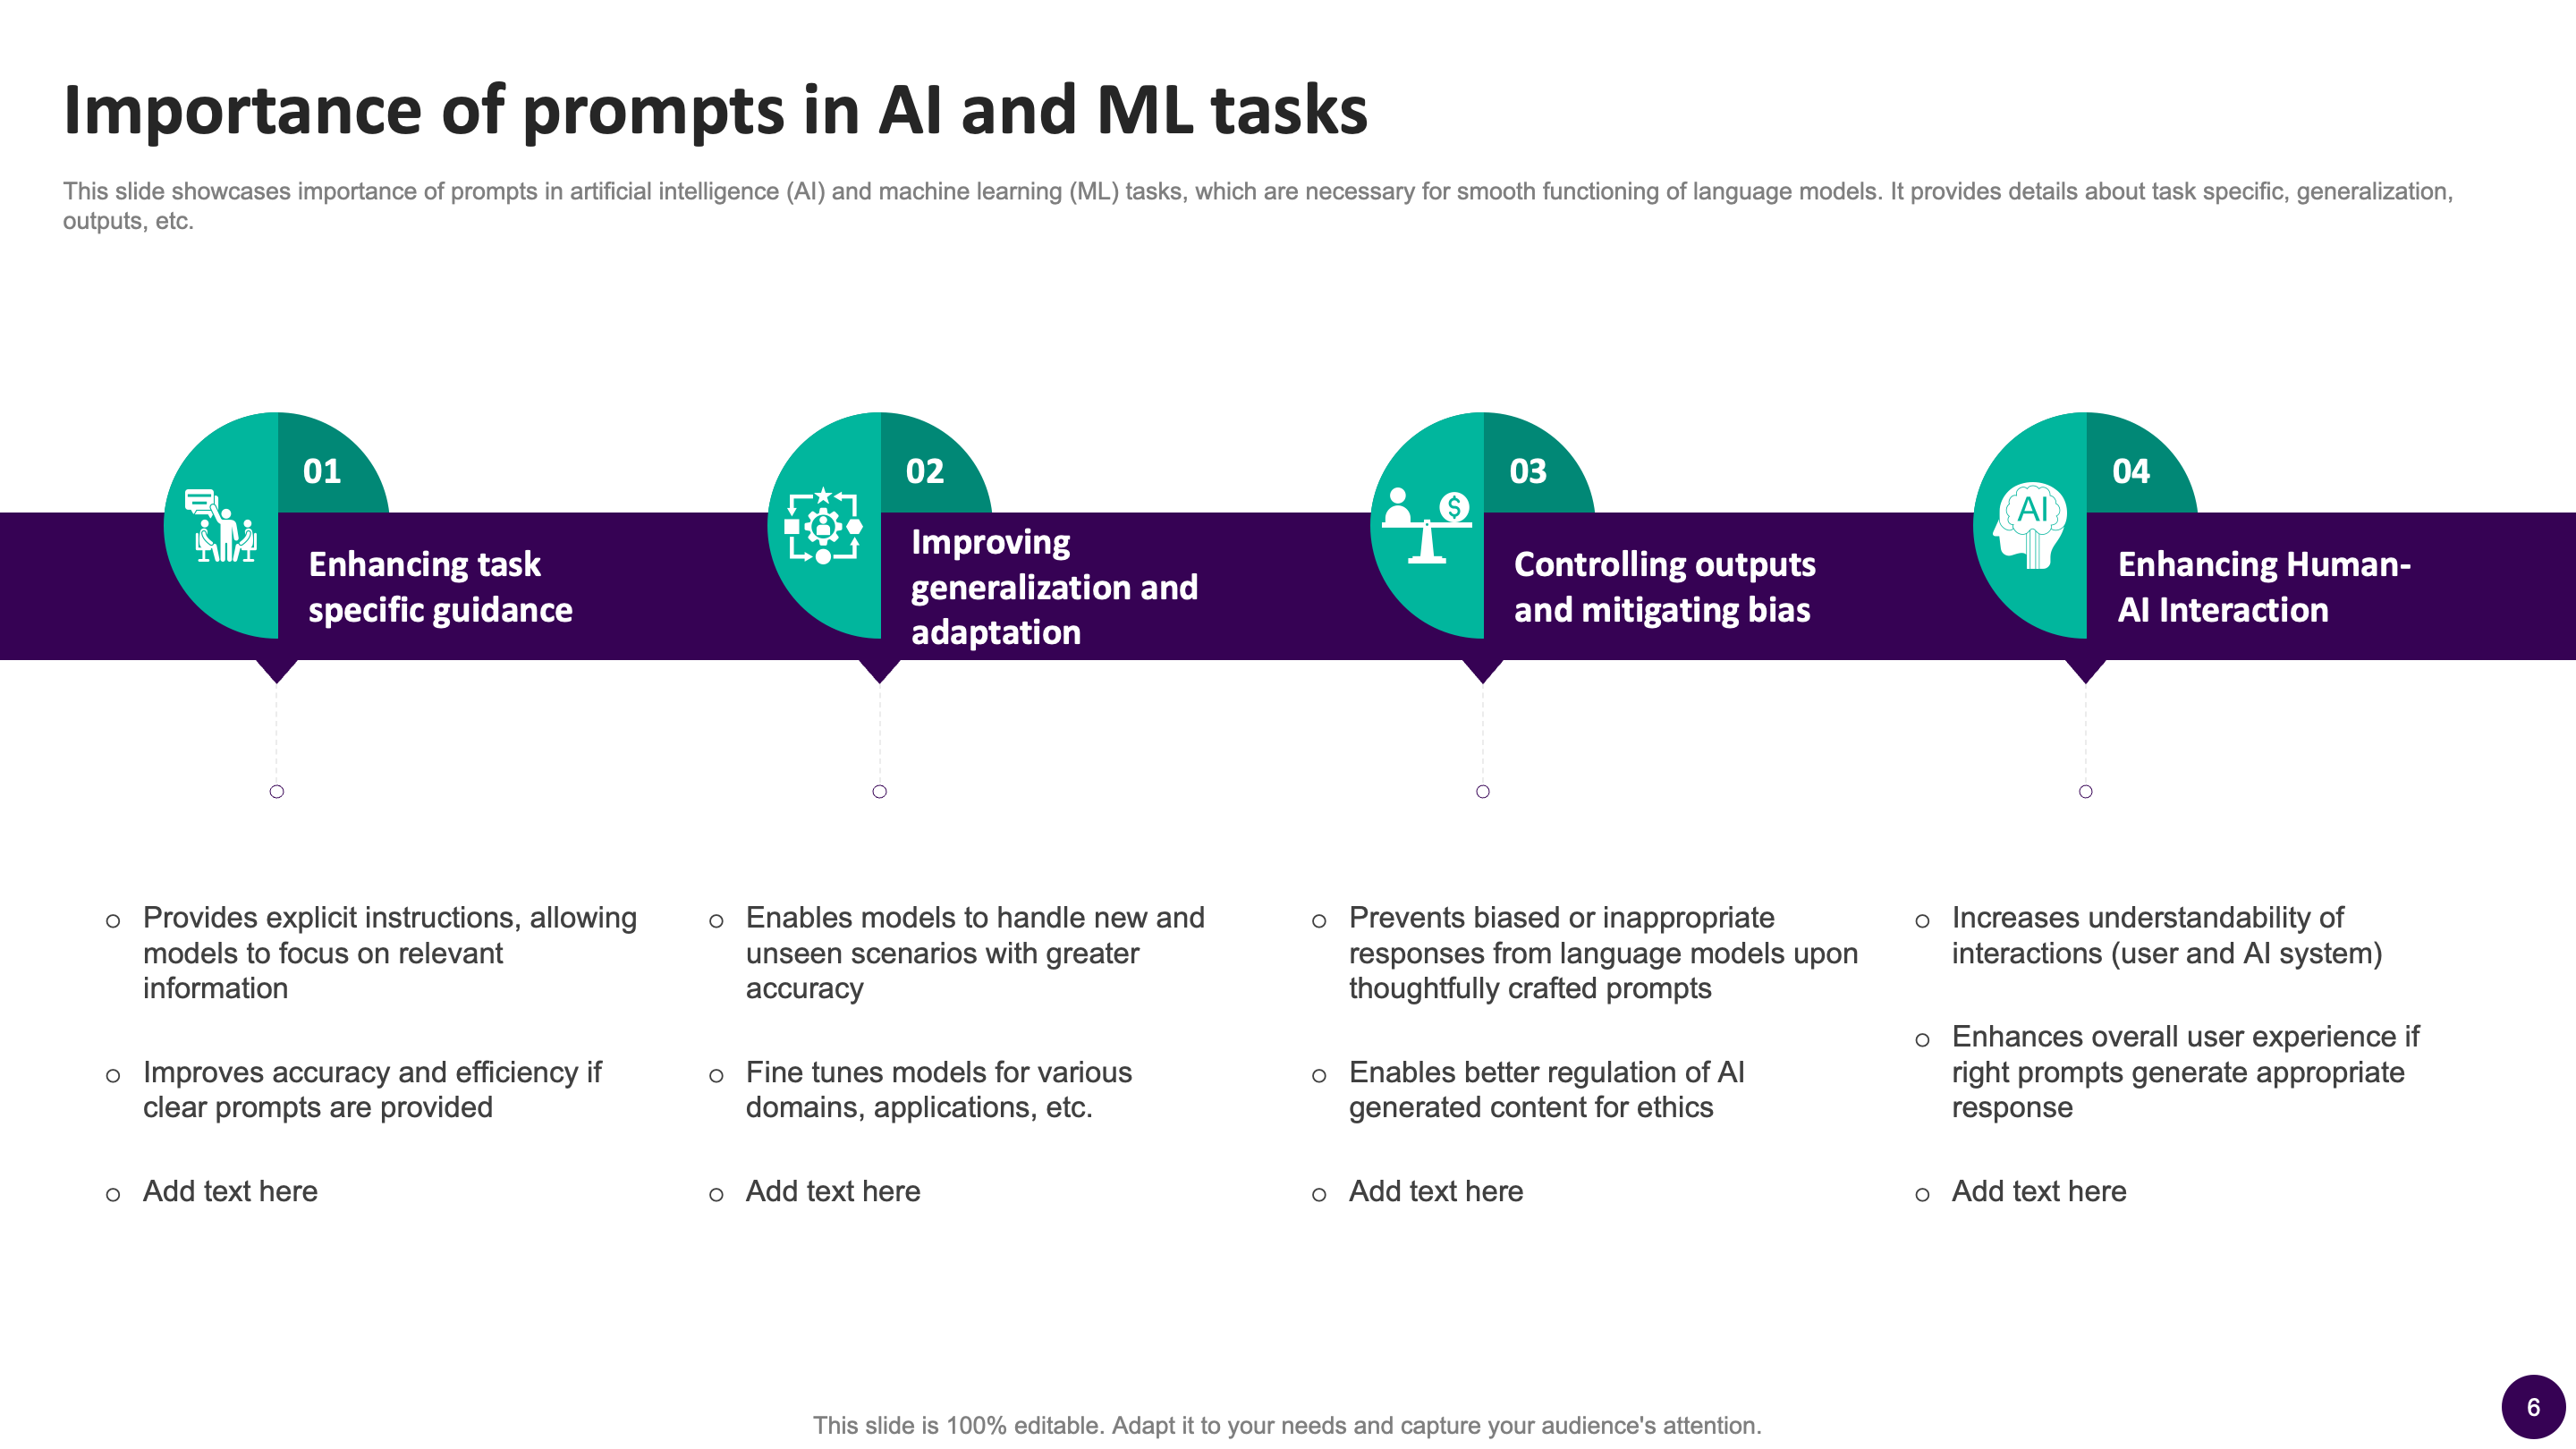 Importance of Prompts in AI and ML Tasks